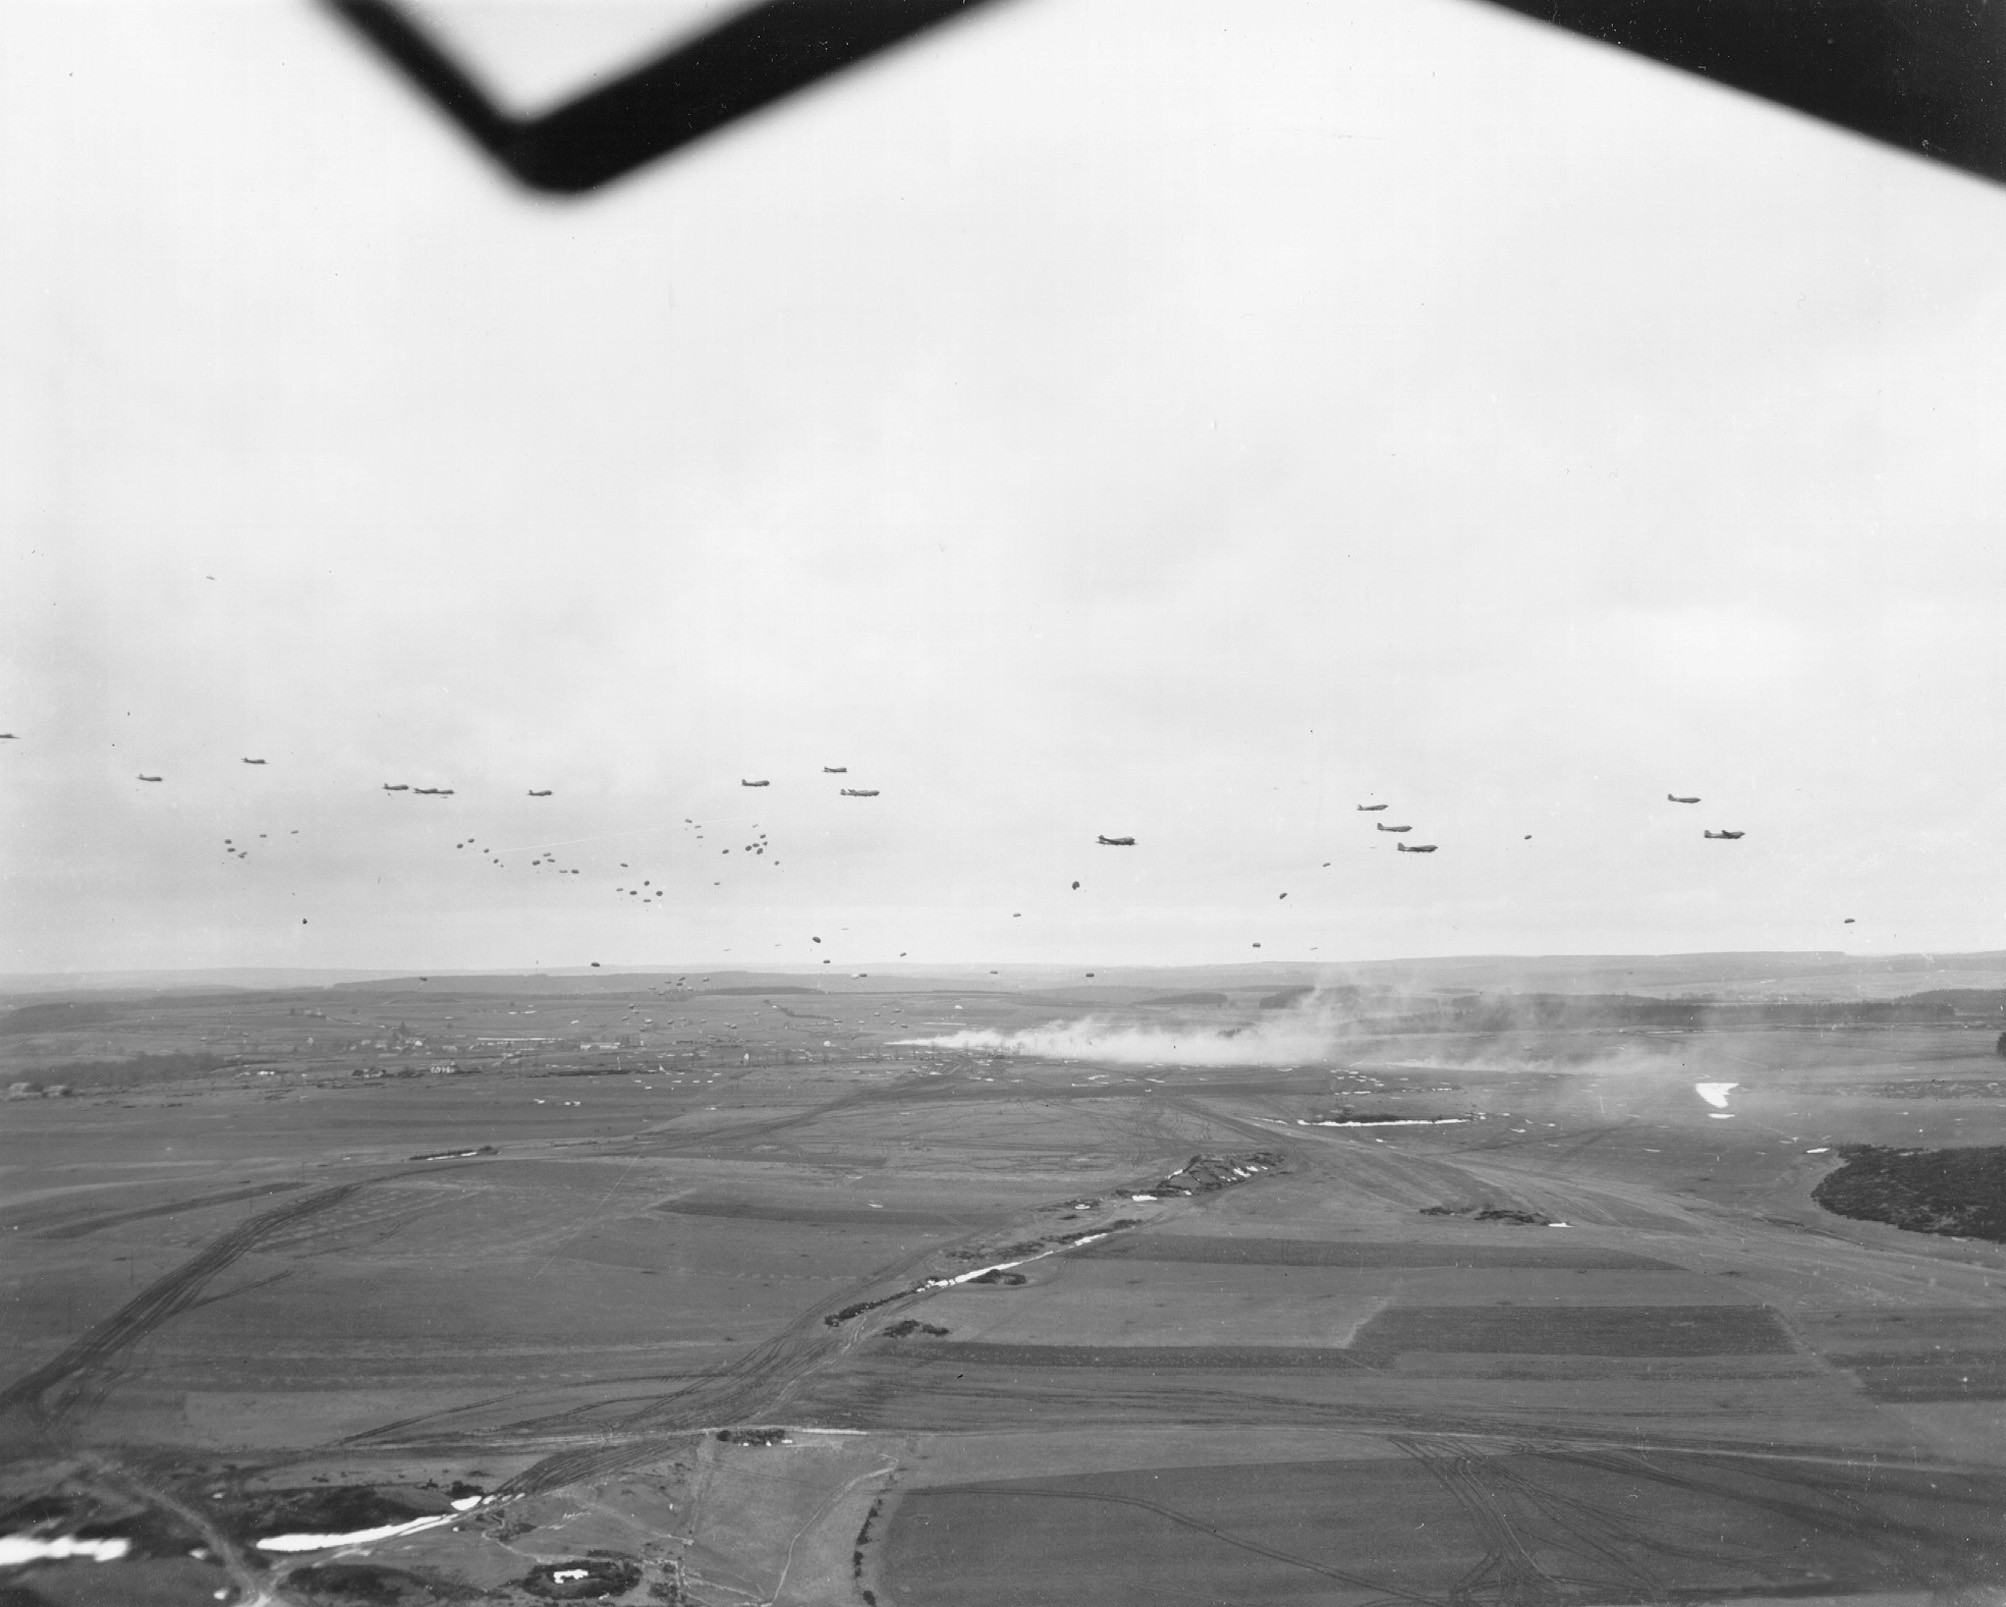 C-47 Skytrain aircraft of US 101st Airborne Division dropping supplies to troops of US 4th Division, Briealf, Germany, 13 Feb 1945